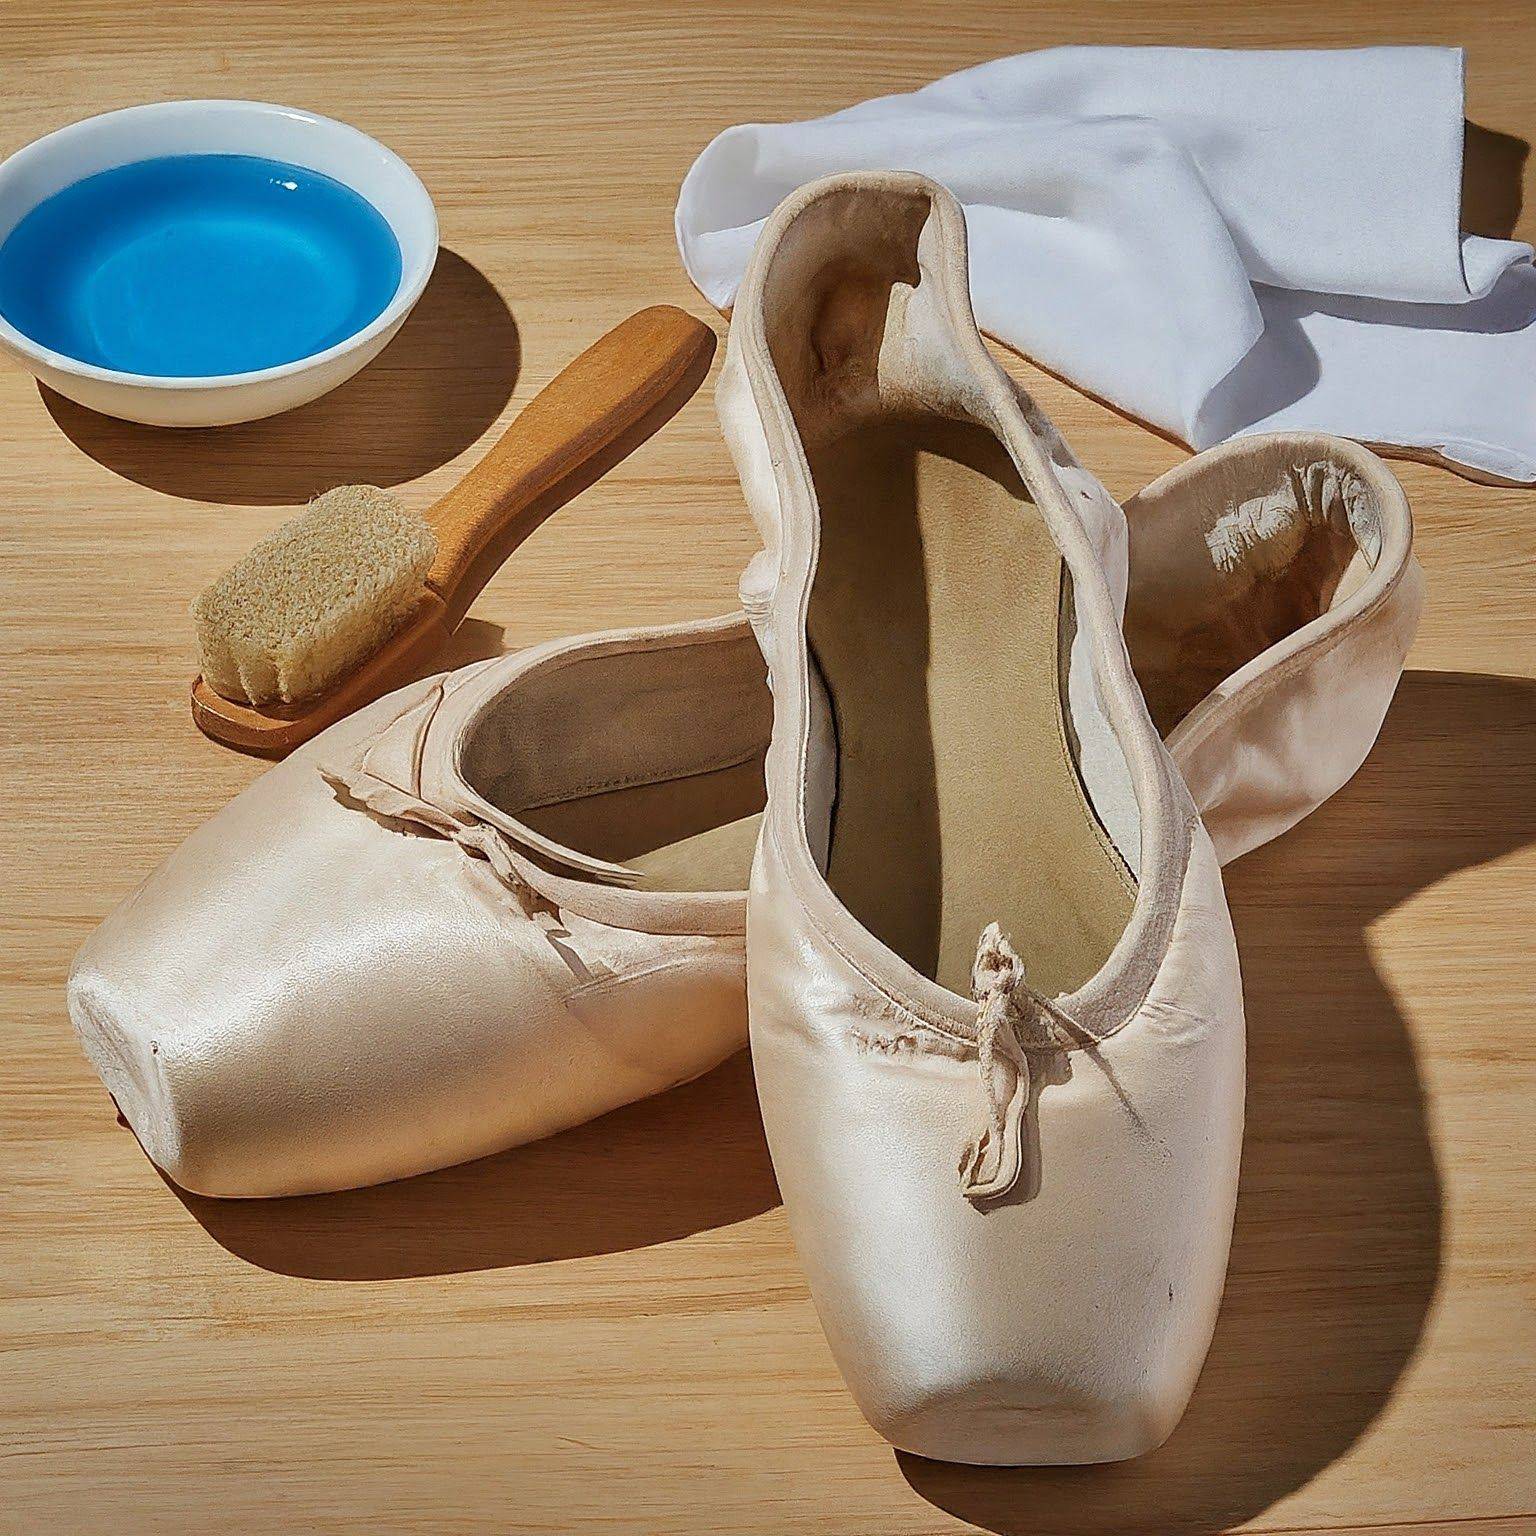 How to Clean Canvas Ballet Shoes by Hand: A Step-by-Step Guide